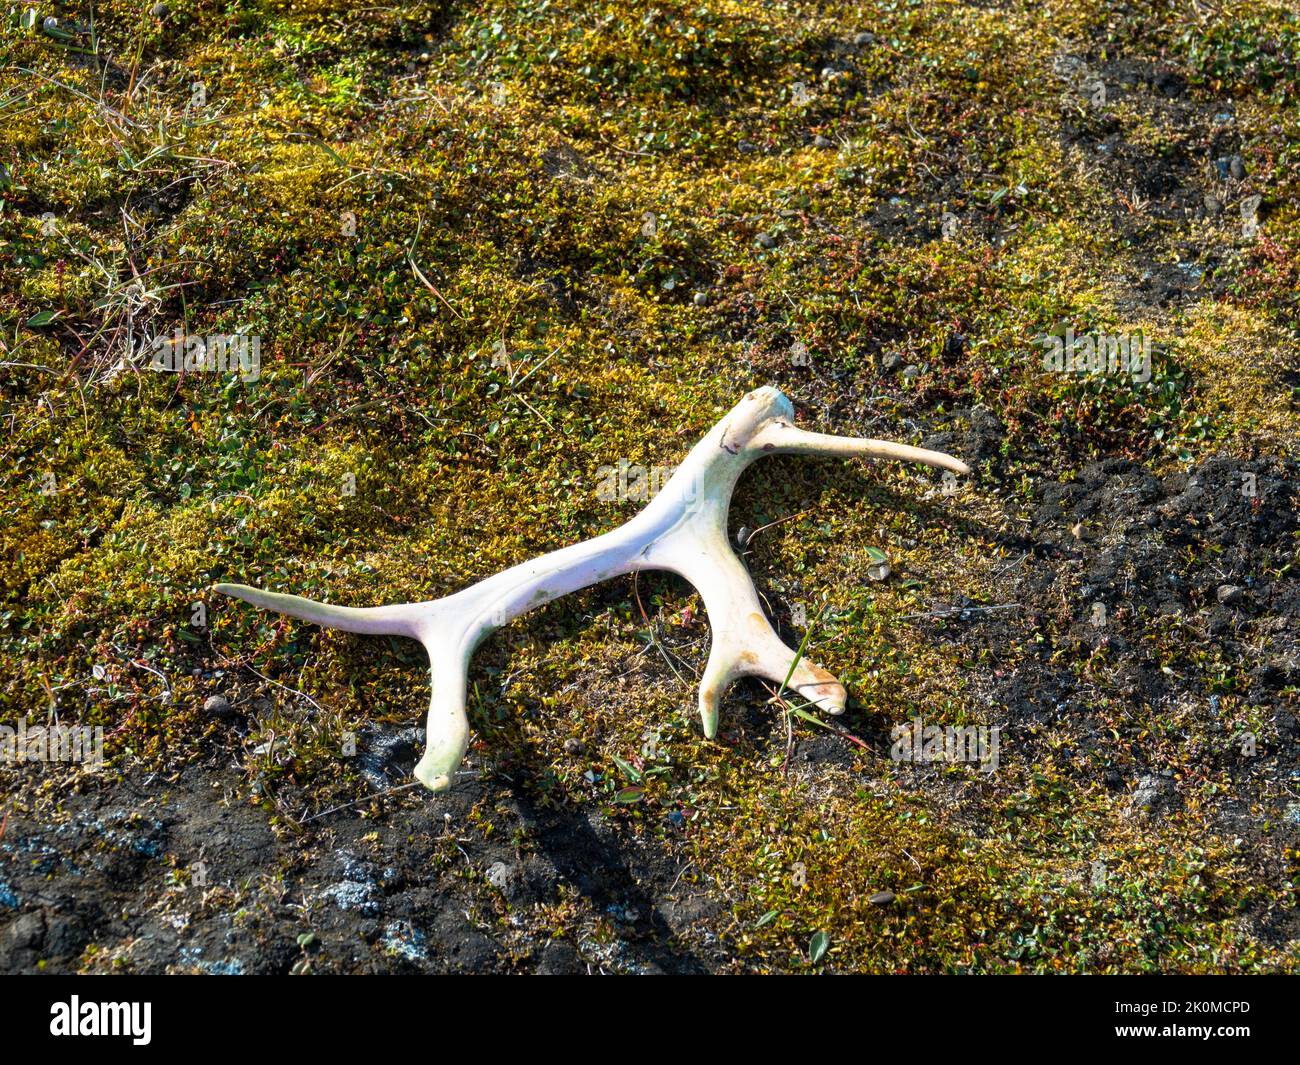 White sun bleached reindeer antlers seen at arctic landscape on Barentsoya Island. Grass and moss background. Svalbard, Norway. Stock Photo